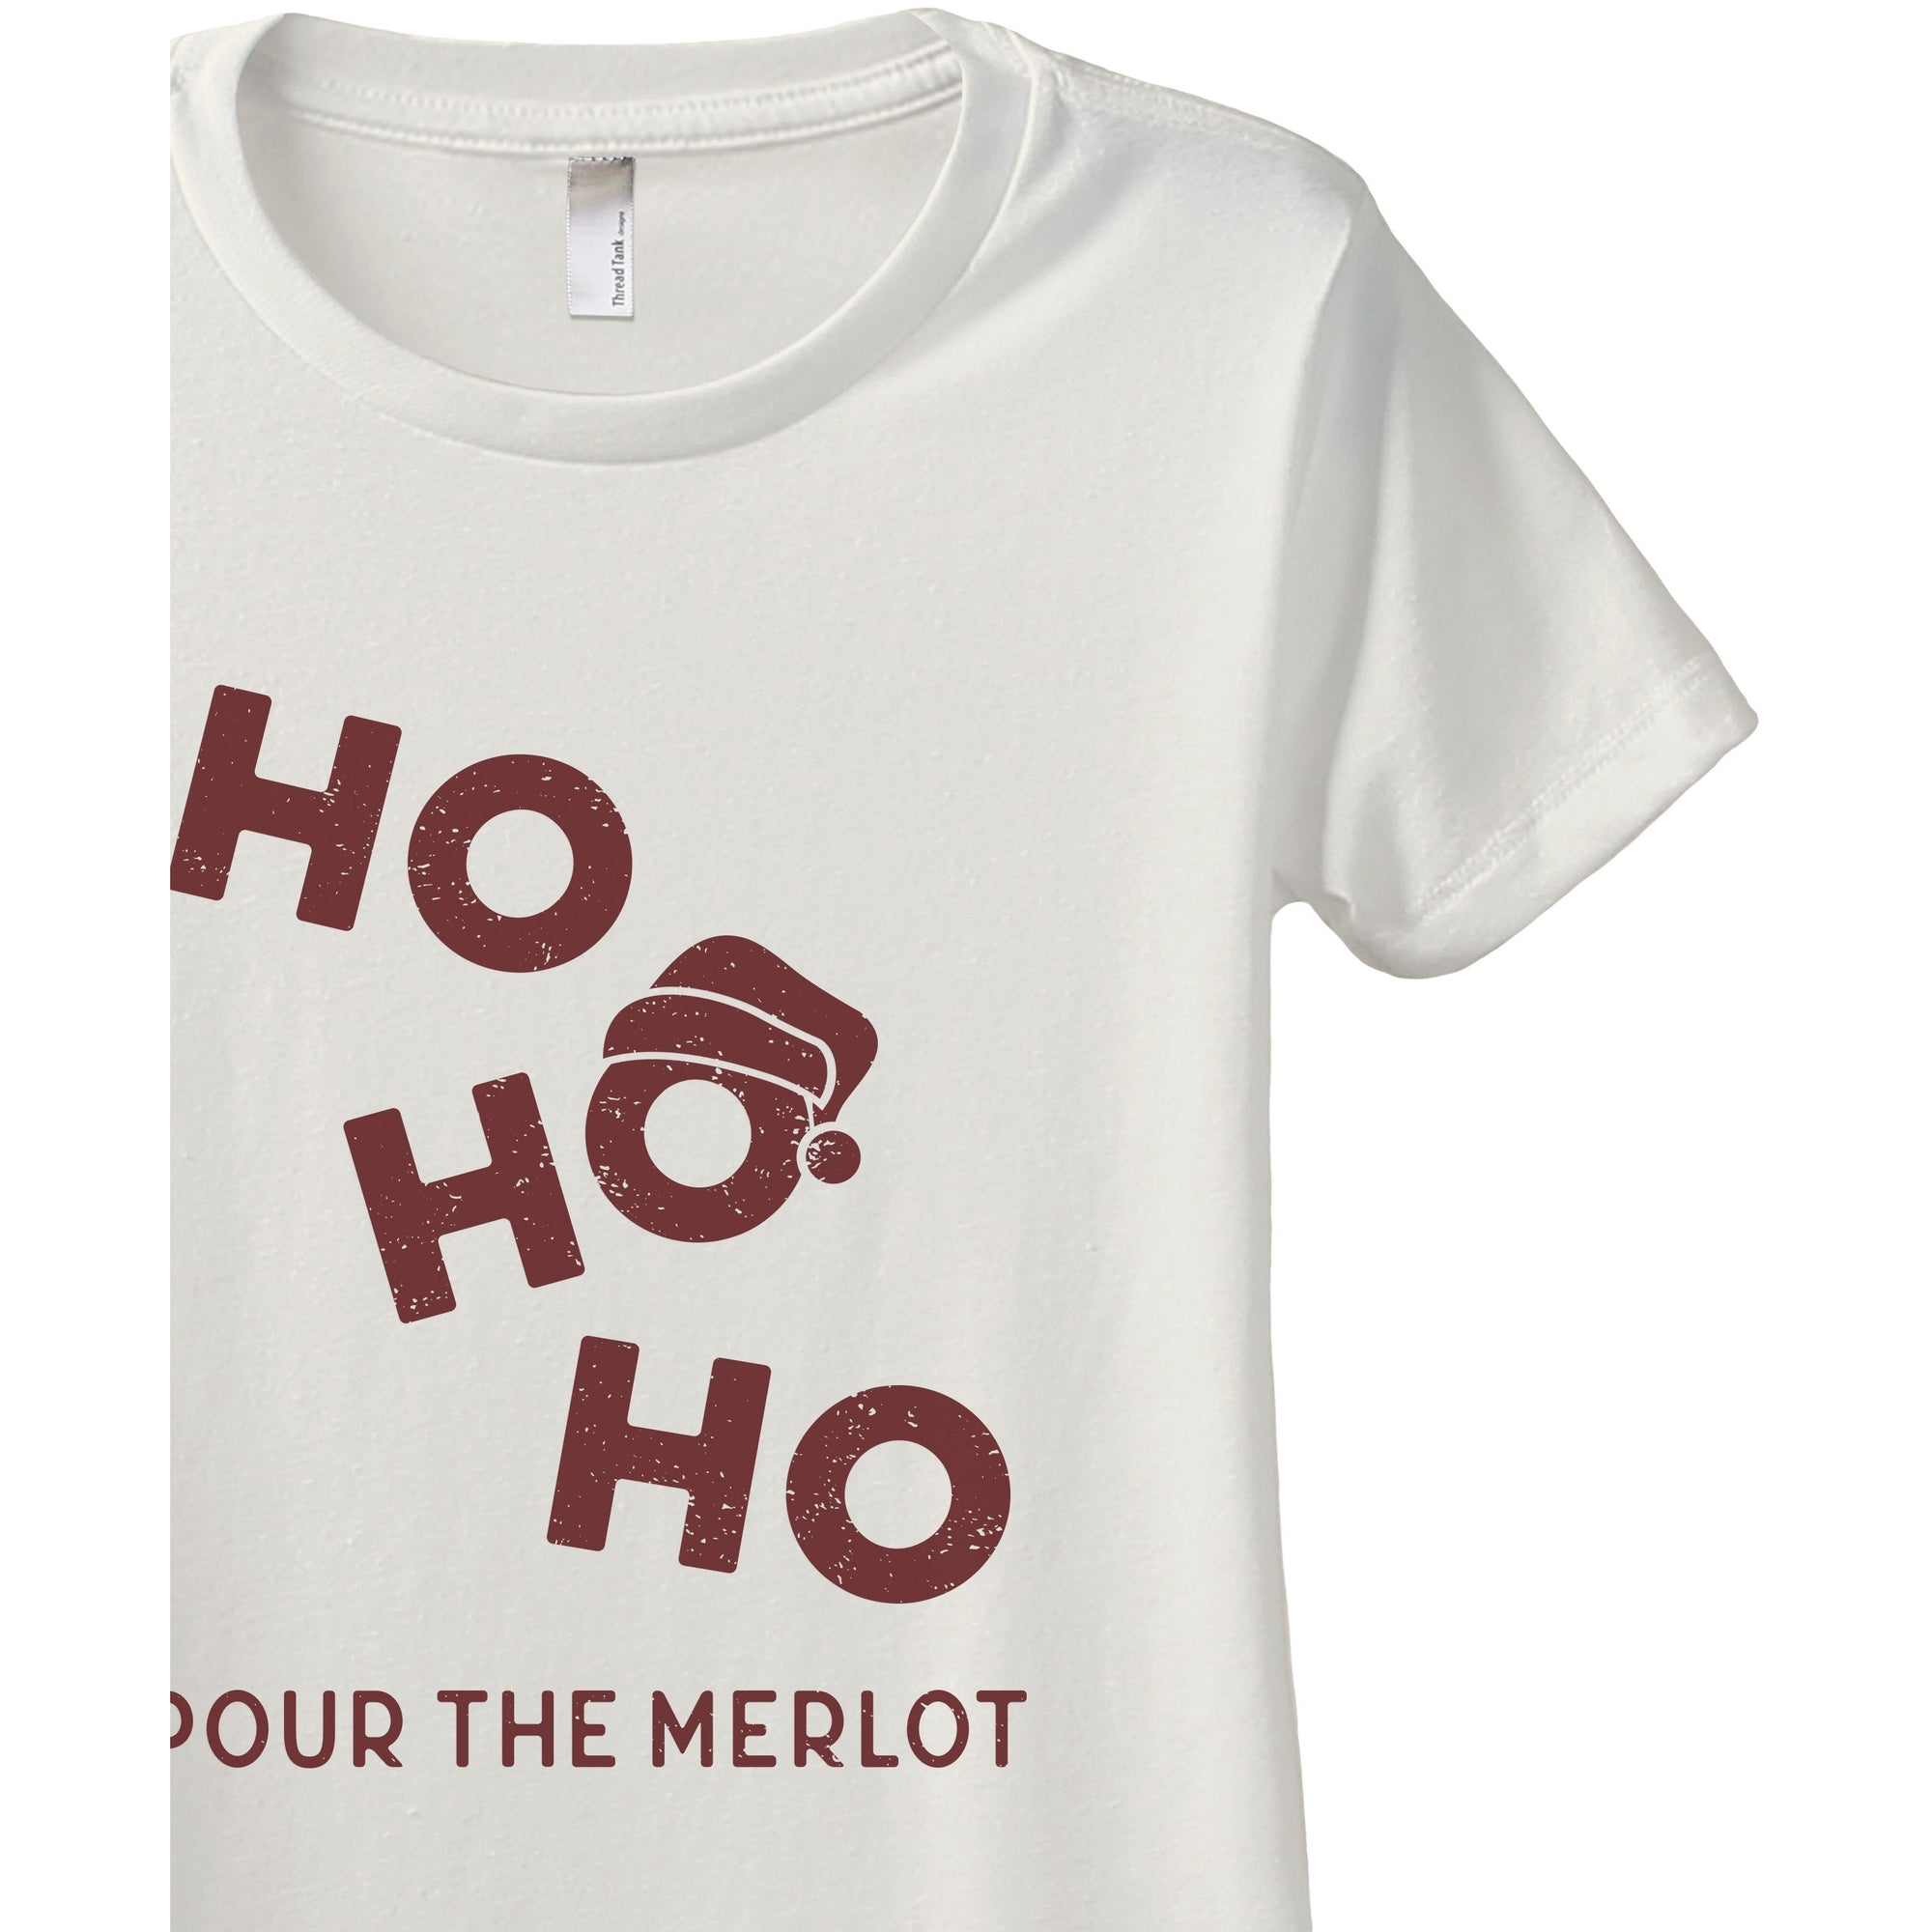 Ho Ho Ho Pour The Merlot Women's Relaxed Crewneck T-Shirt Top Tee Vintage White Scarlet Scarlet Print Zoom Details